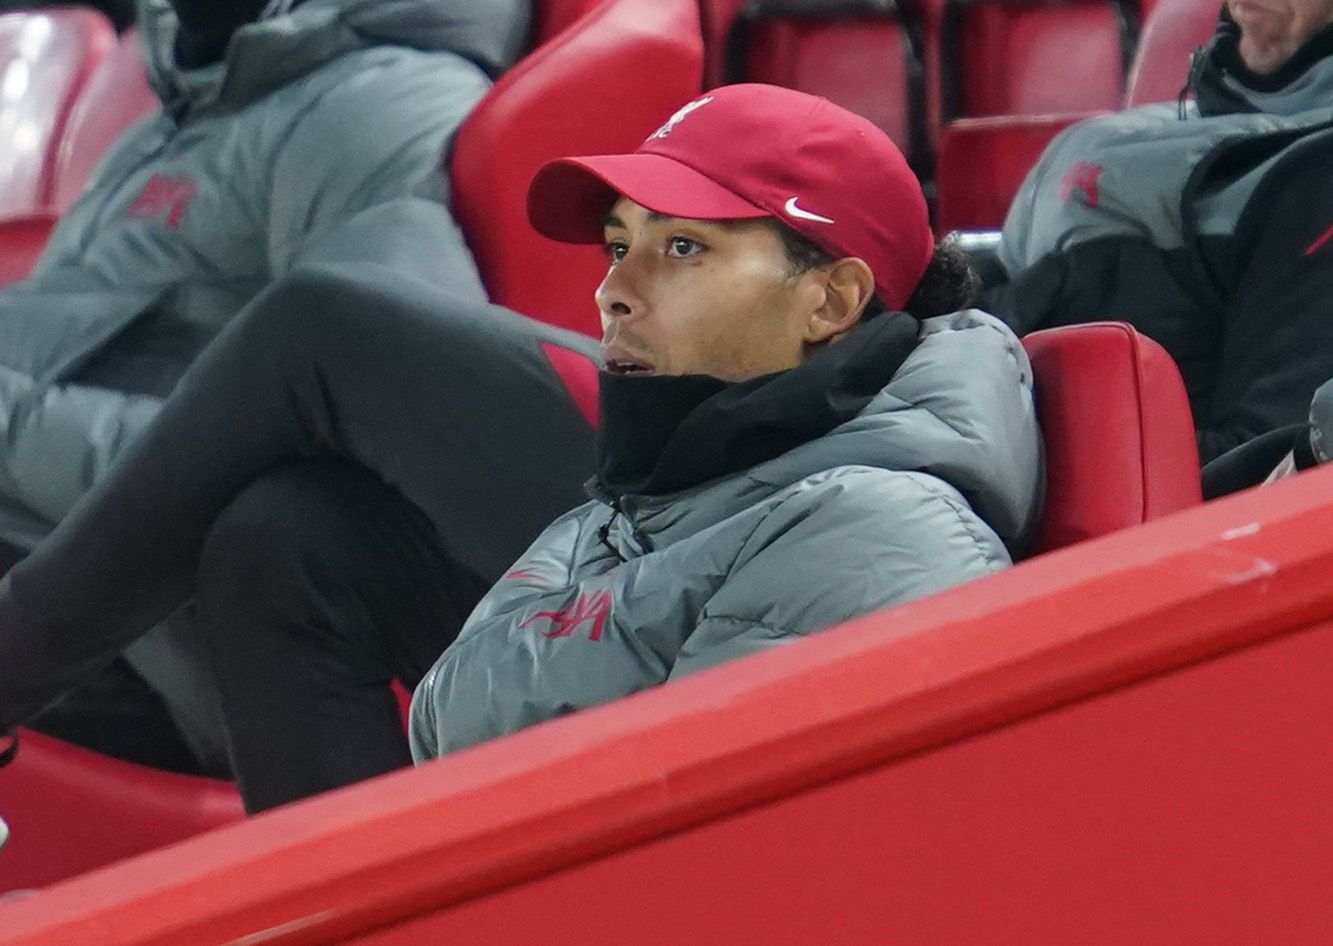 Soccer Football - Premier League - Liverpool v Wolverhampton Wanderers - Anfield, Liverpool, Britain - December 6, 2020 Liverpool's Virgil van Dijk watches the match from the stands Pool via REUTERS/Jon Super EDITORIAL USE ONLY. No use with unauthorized audio, video, data, fixture lists, club/league logos or 'live' services. Online in-match use limited to 75 images, no video emulation. No use in betting, games or single club /league/player publications.  Please contact your account representativ